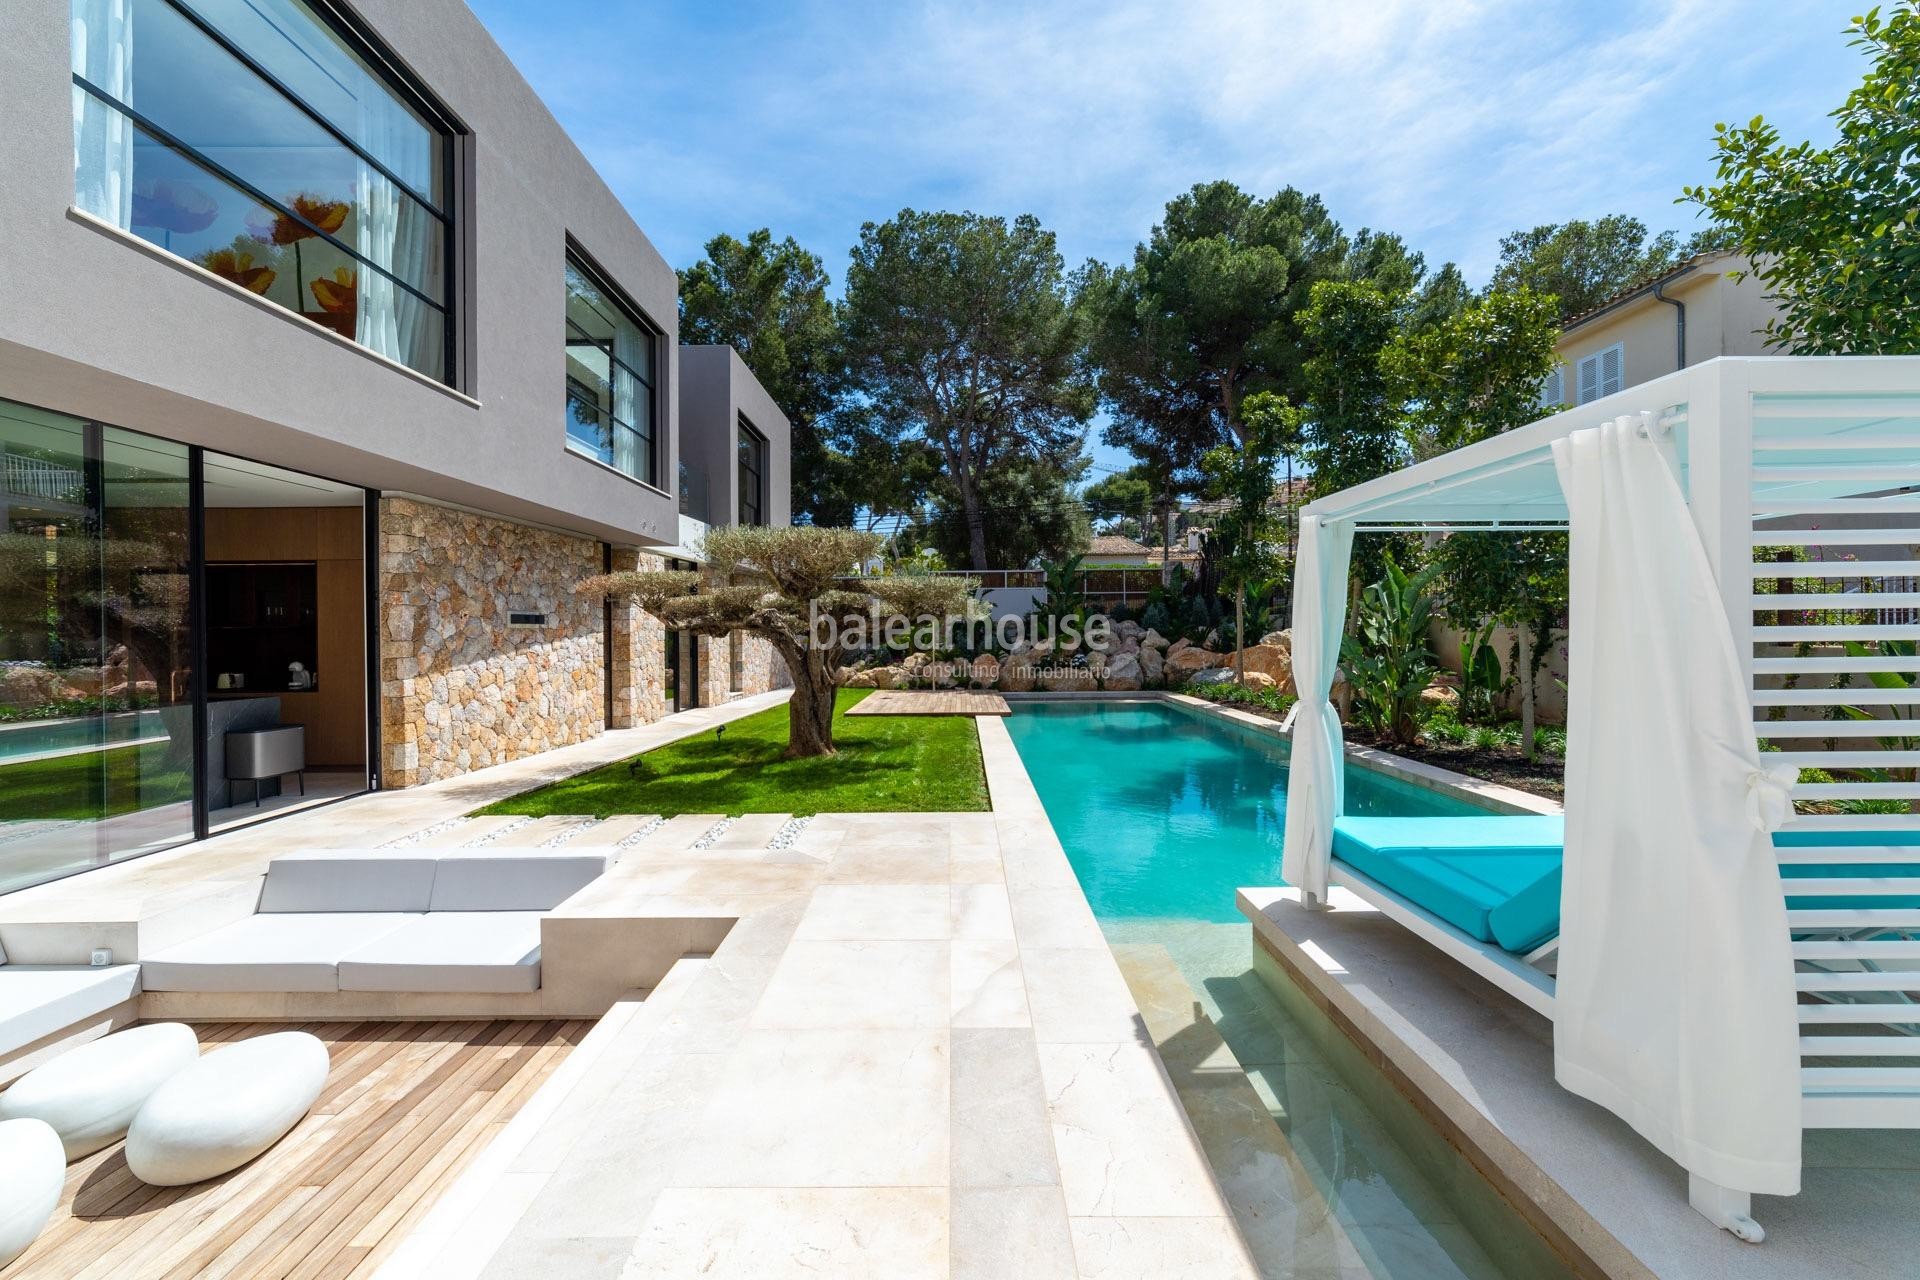 Large designer villa near beaches with excellent qualities in the privileged area of Santa Ponsa